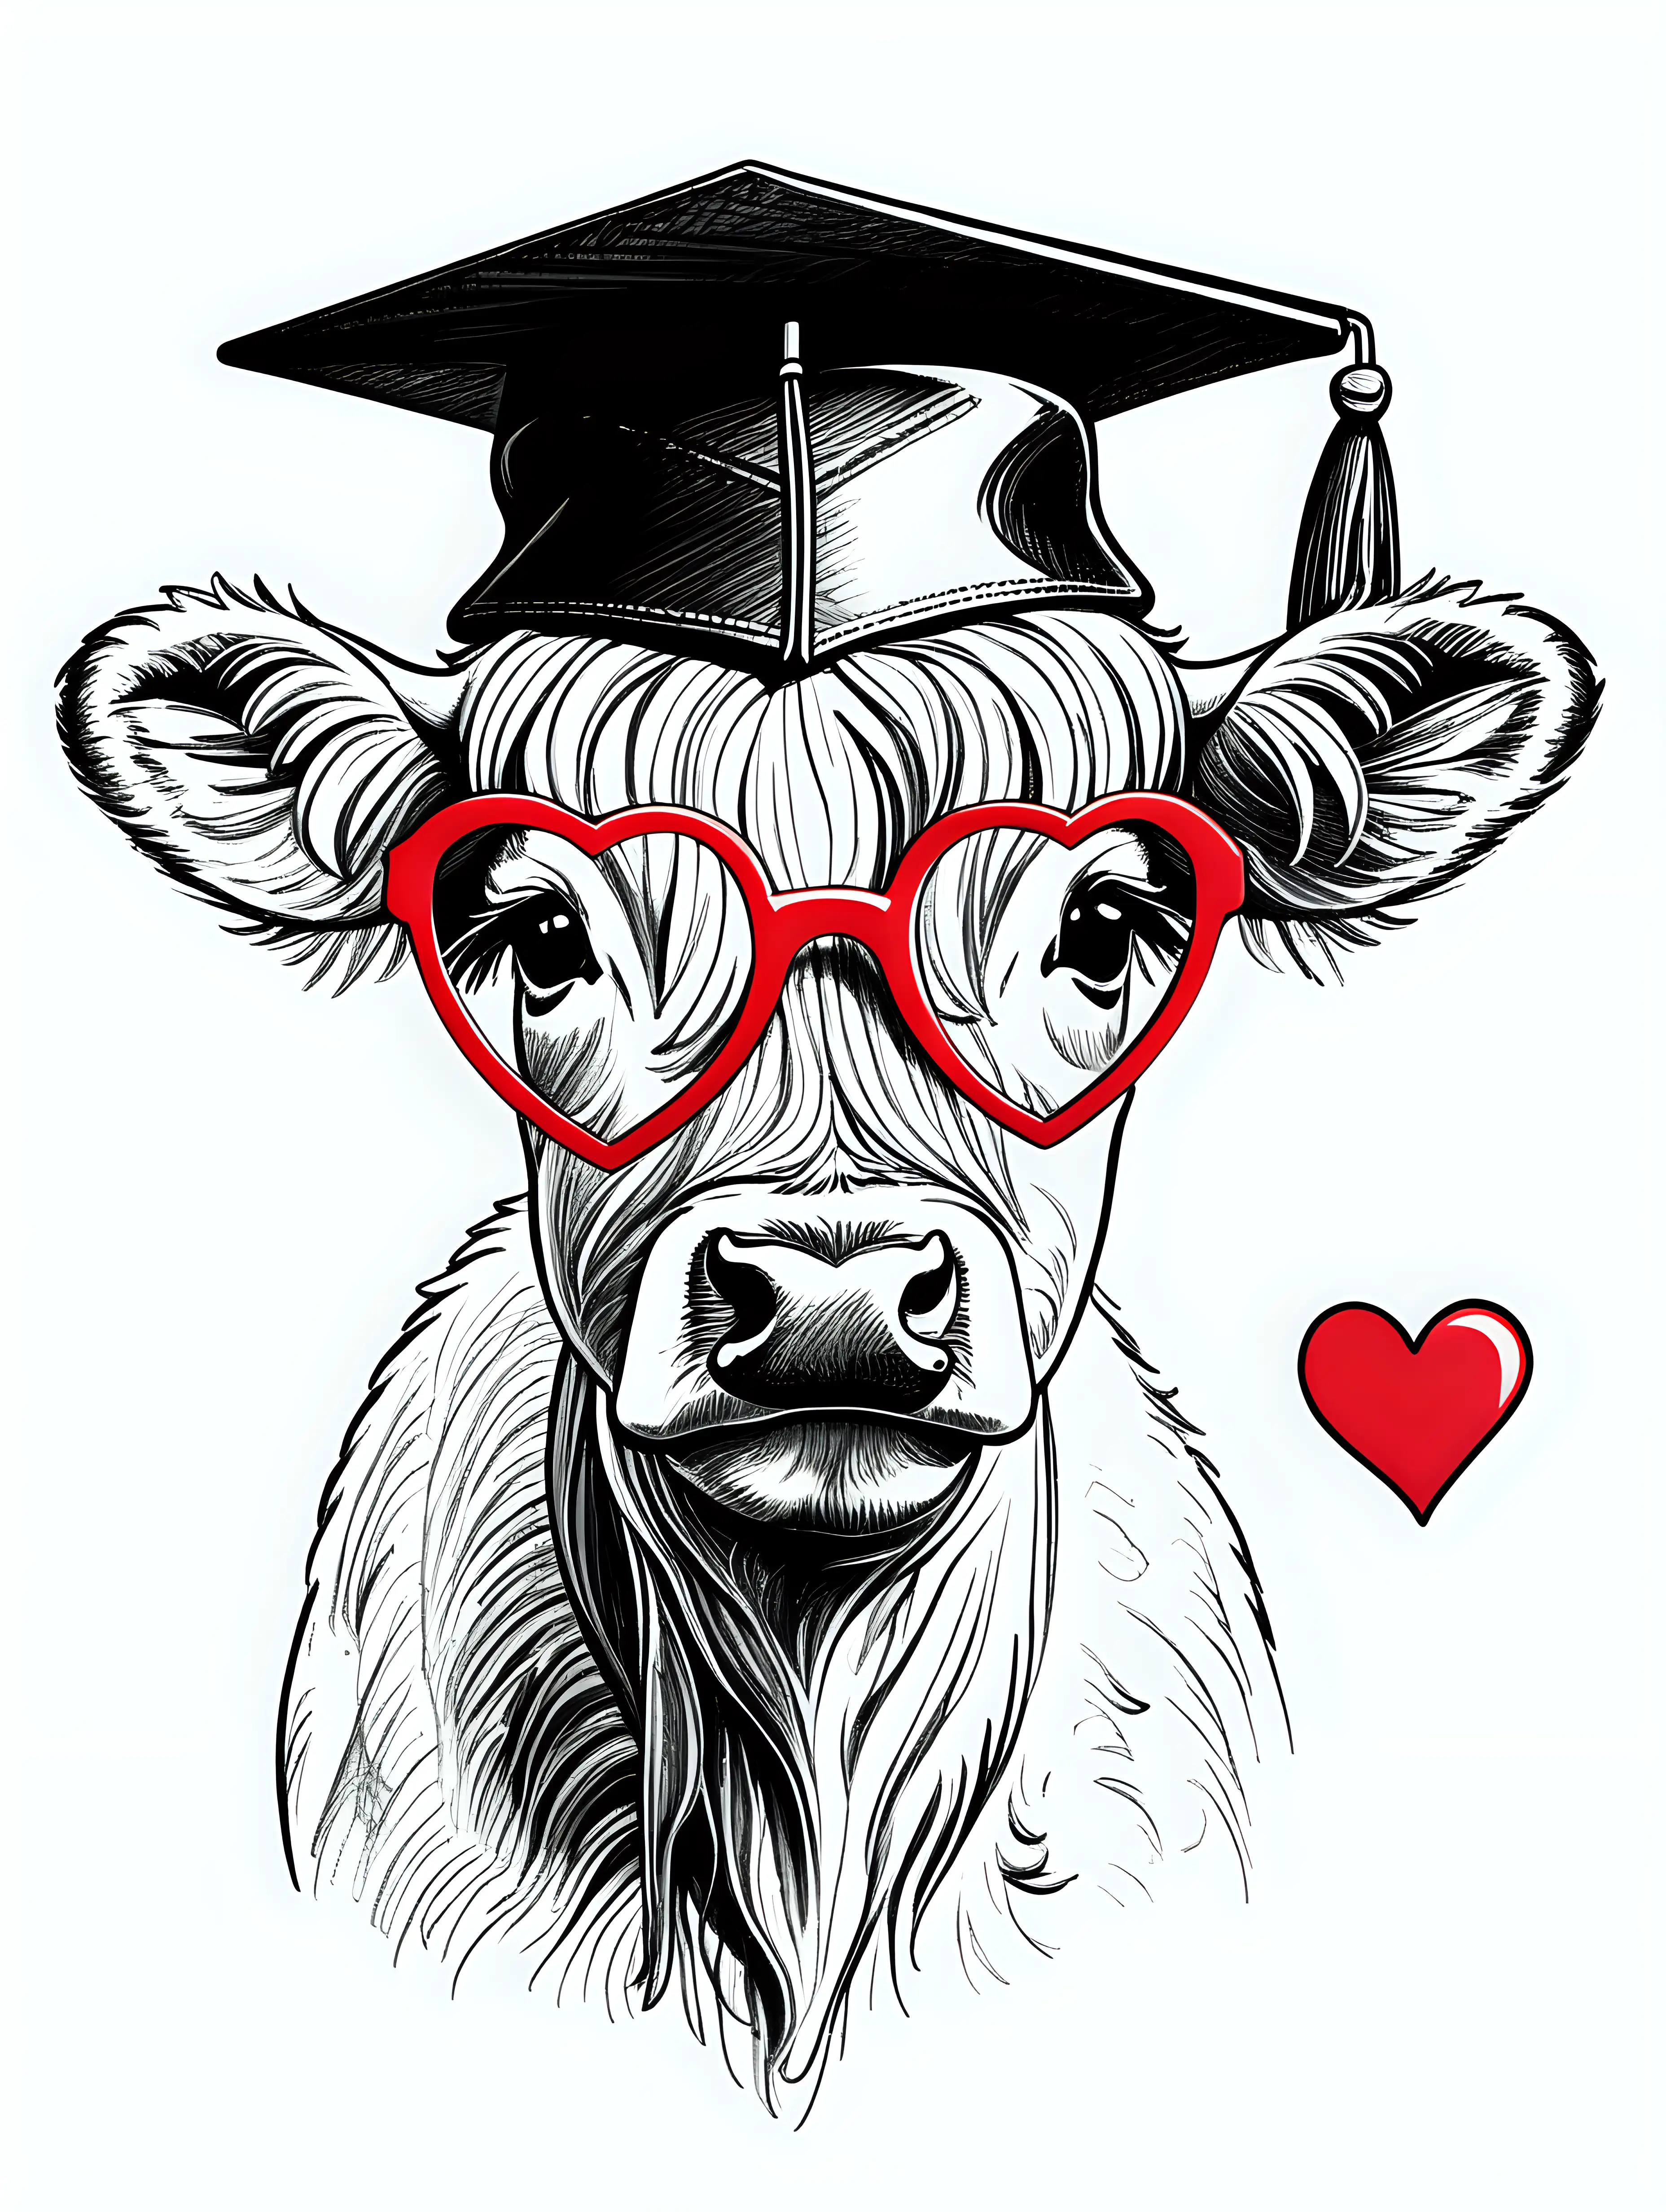 Highland Calf with Heart Glasses and Graduation Cap Sketch